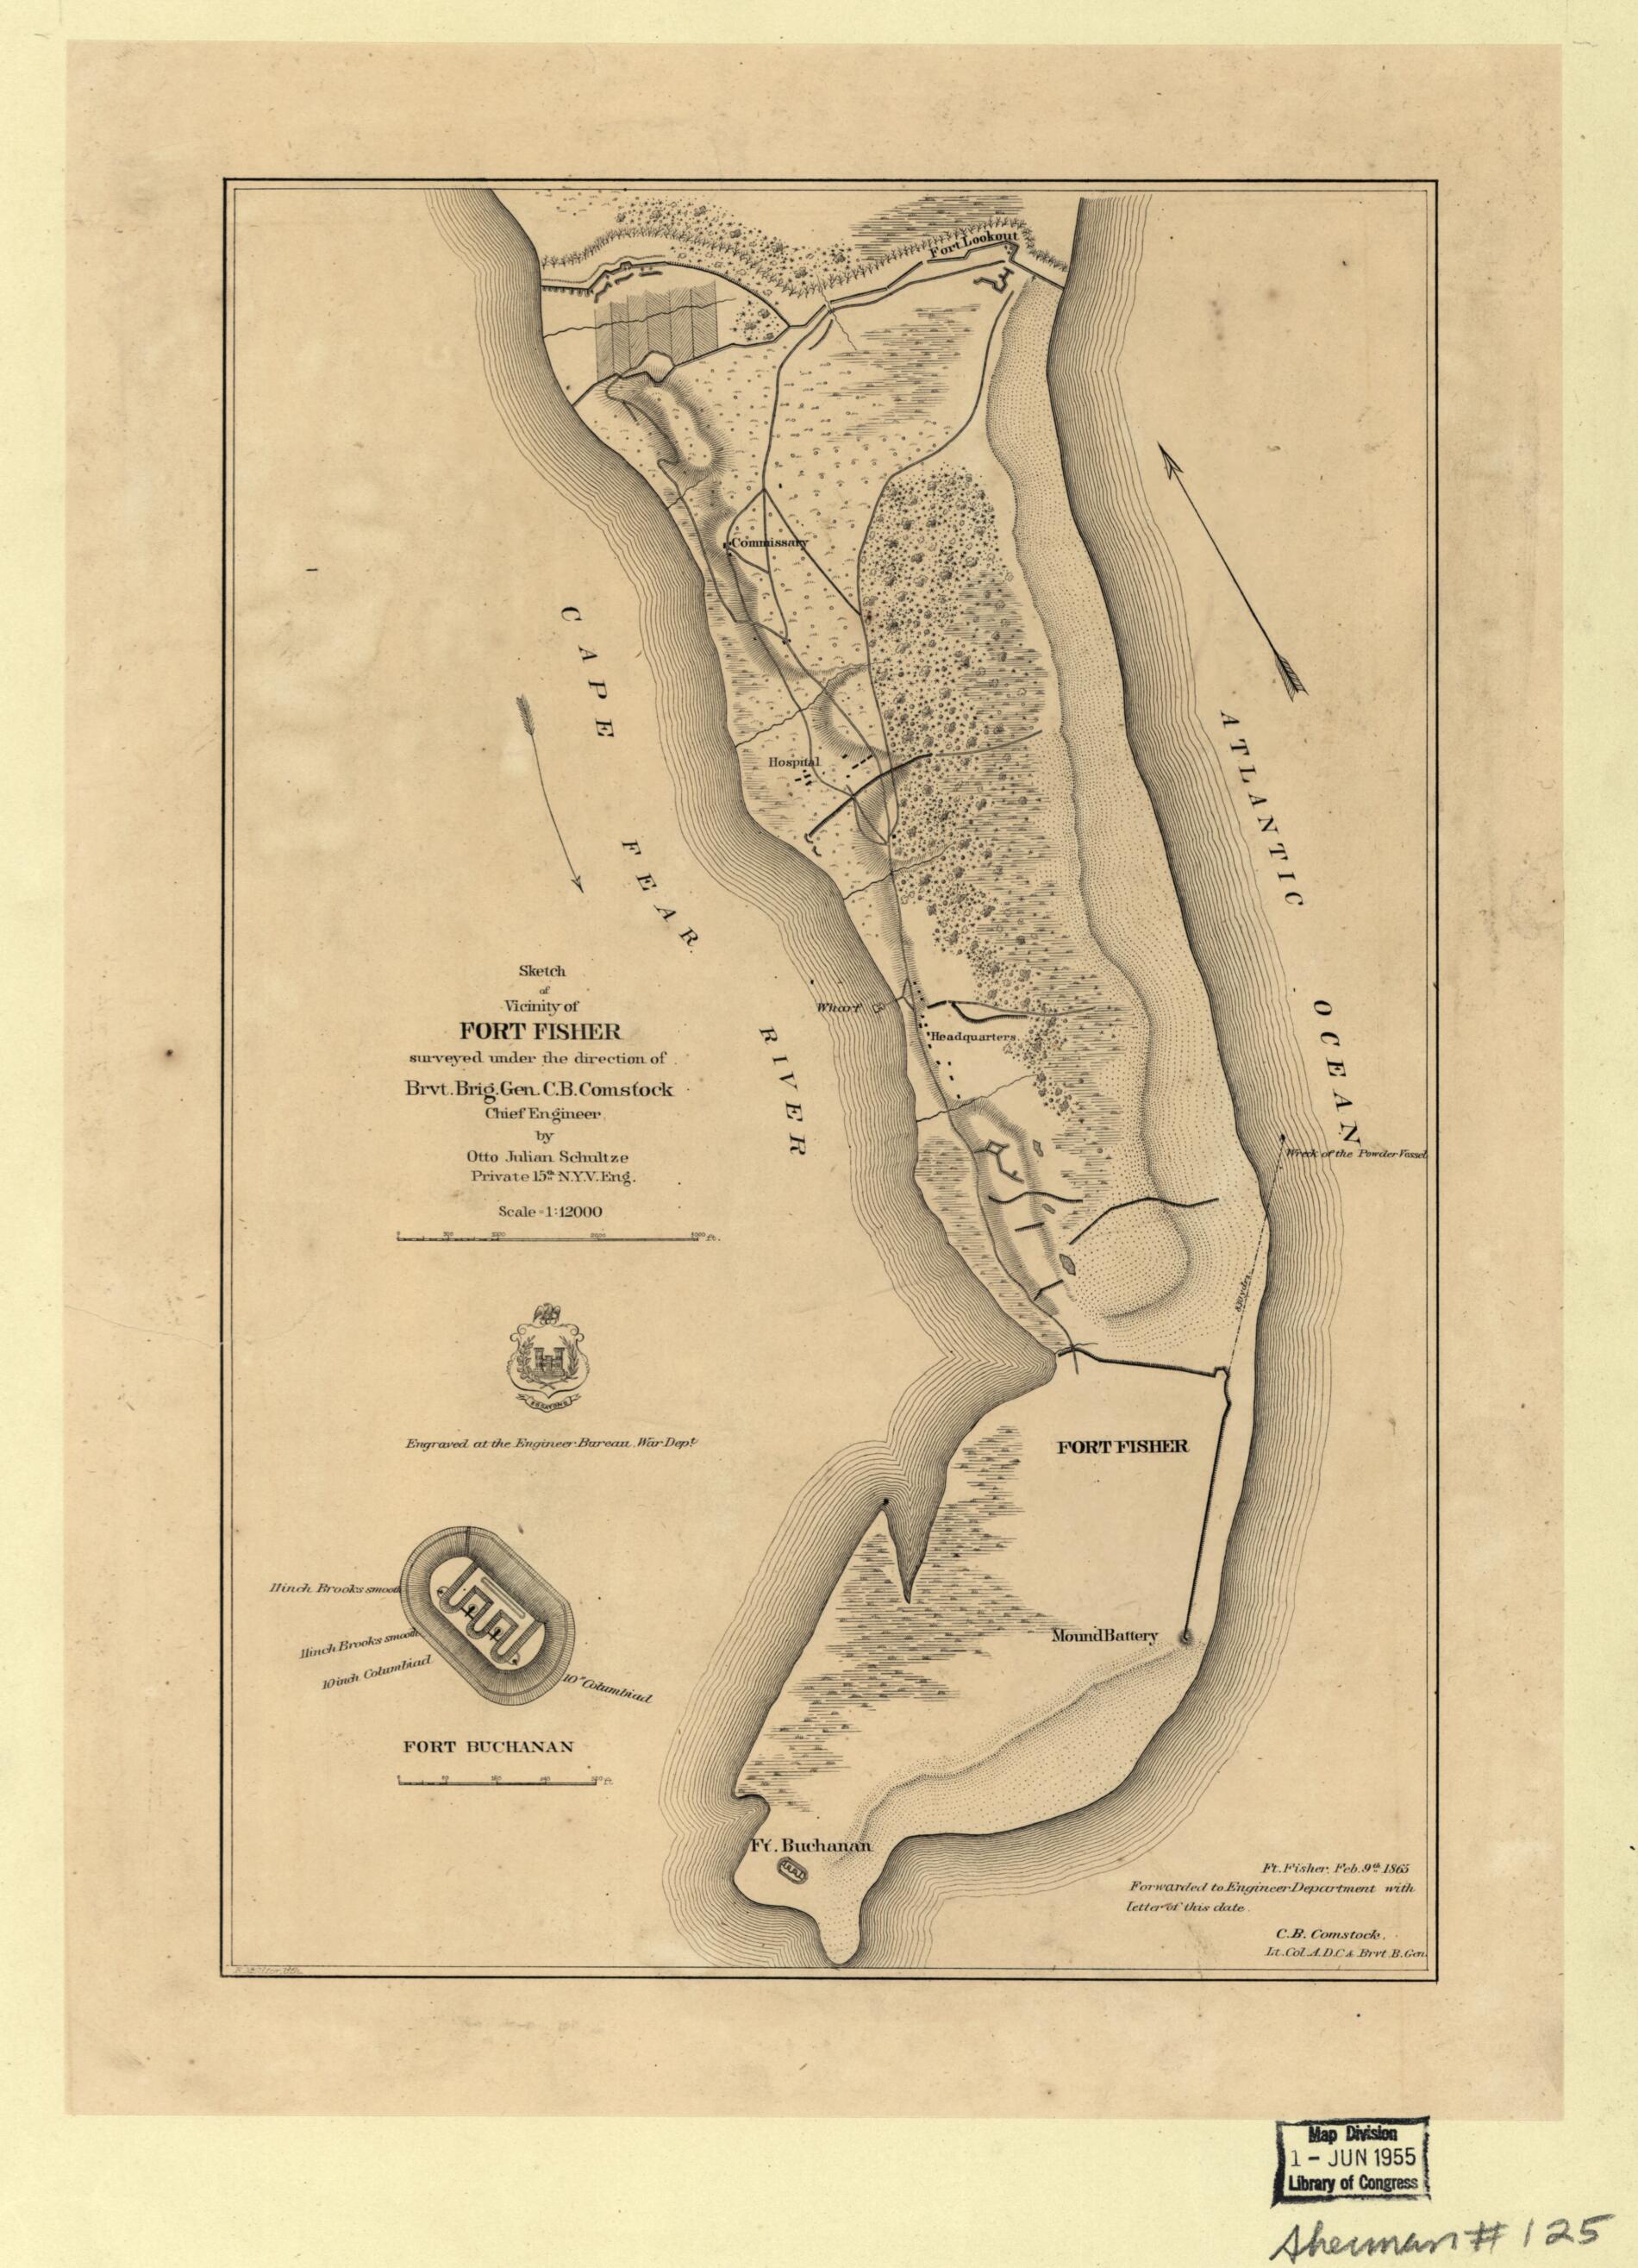 This old map of Sketch of Vicinity of Fort Fisher from 1865 was created by C. B. (Cyrus Ballou) Comstock, E. Molitor, O. M. (Orlando Metcalfe) Poe, Otto Julian Schultze,  United States. War Department. Engineer Bureau in 1865